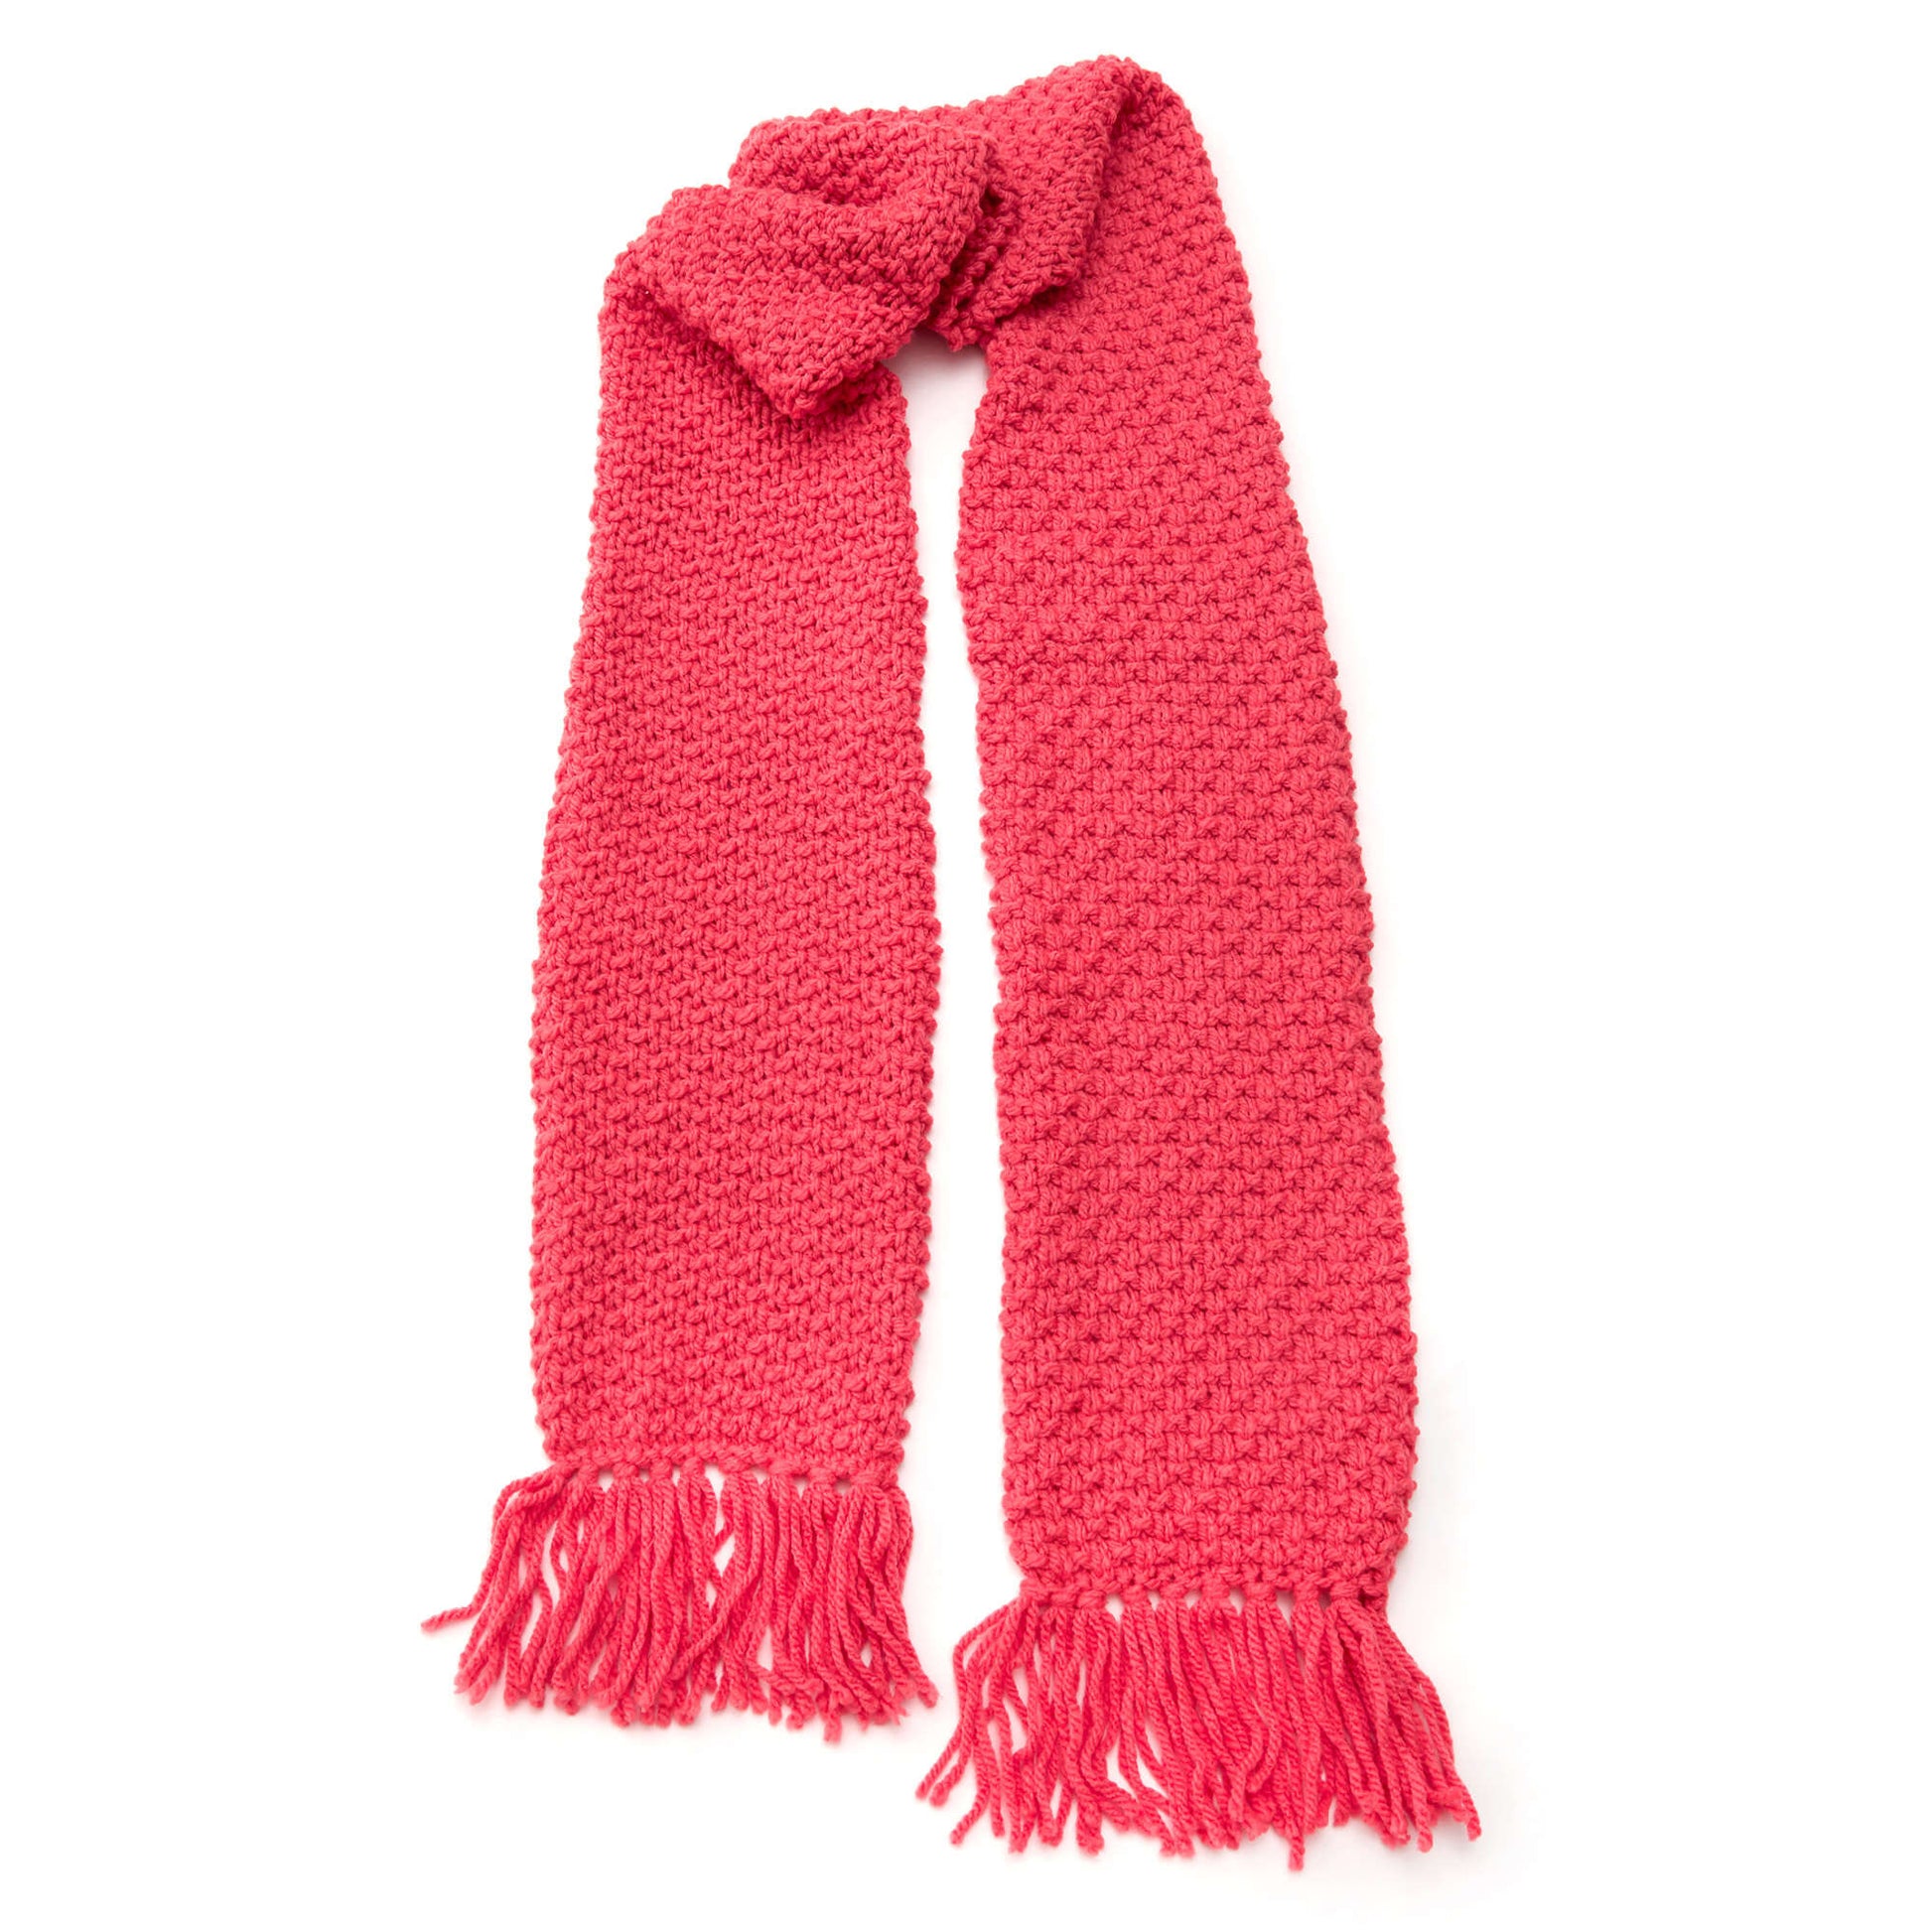 Free Red Heart Textured Fringe Scarf Knit Pattern